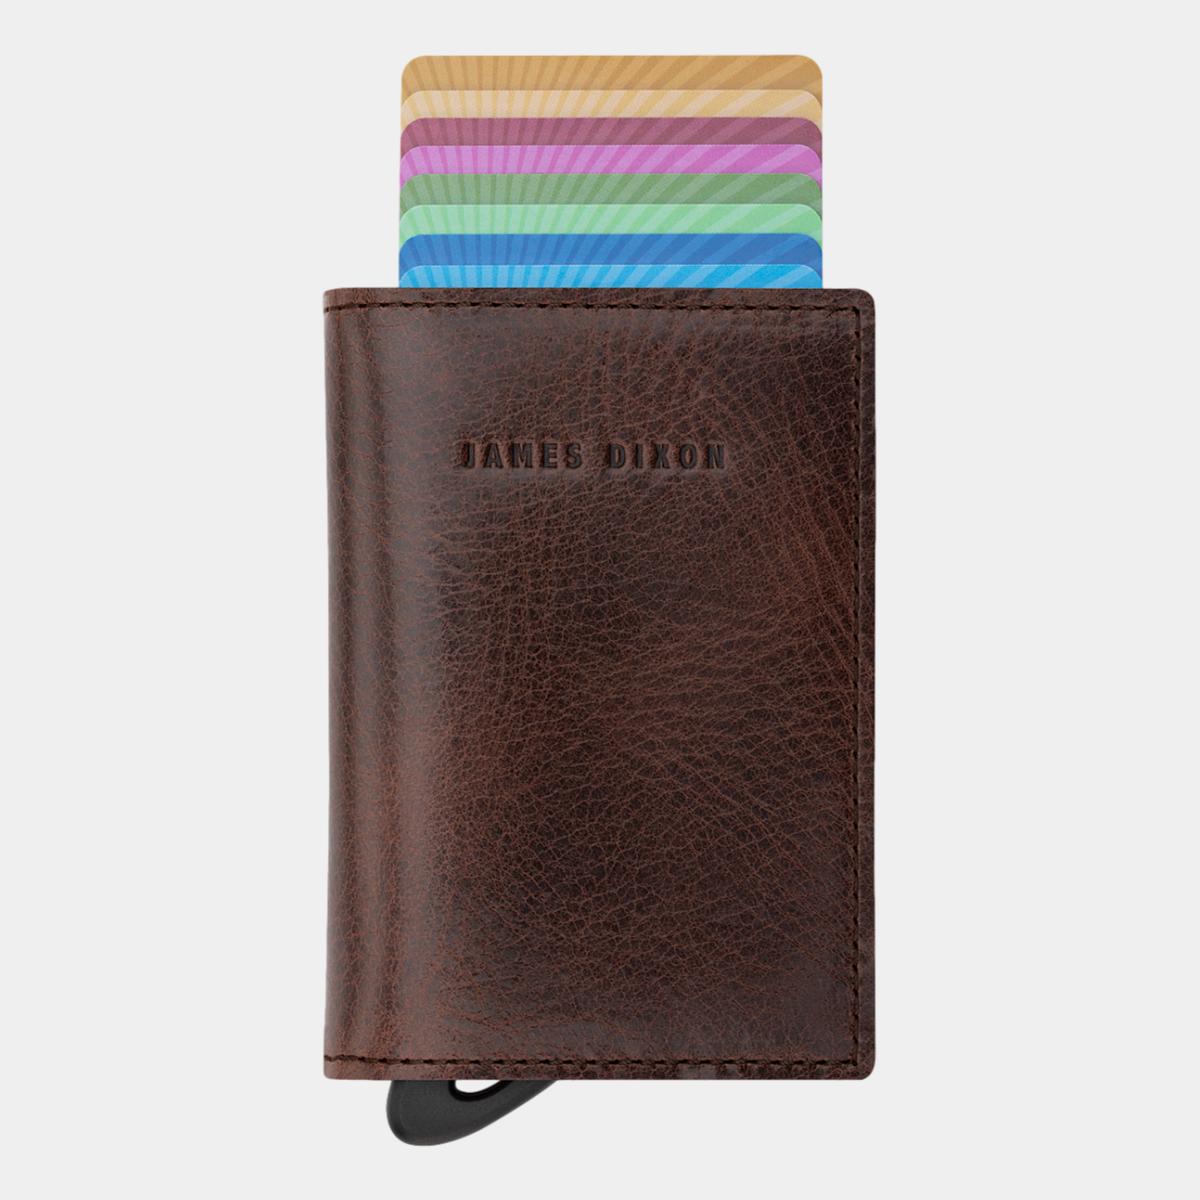 jd0005 james dixon puro classic cacao brown wallet front